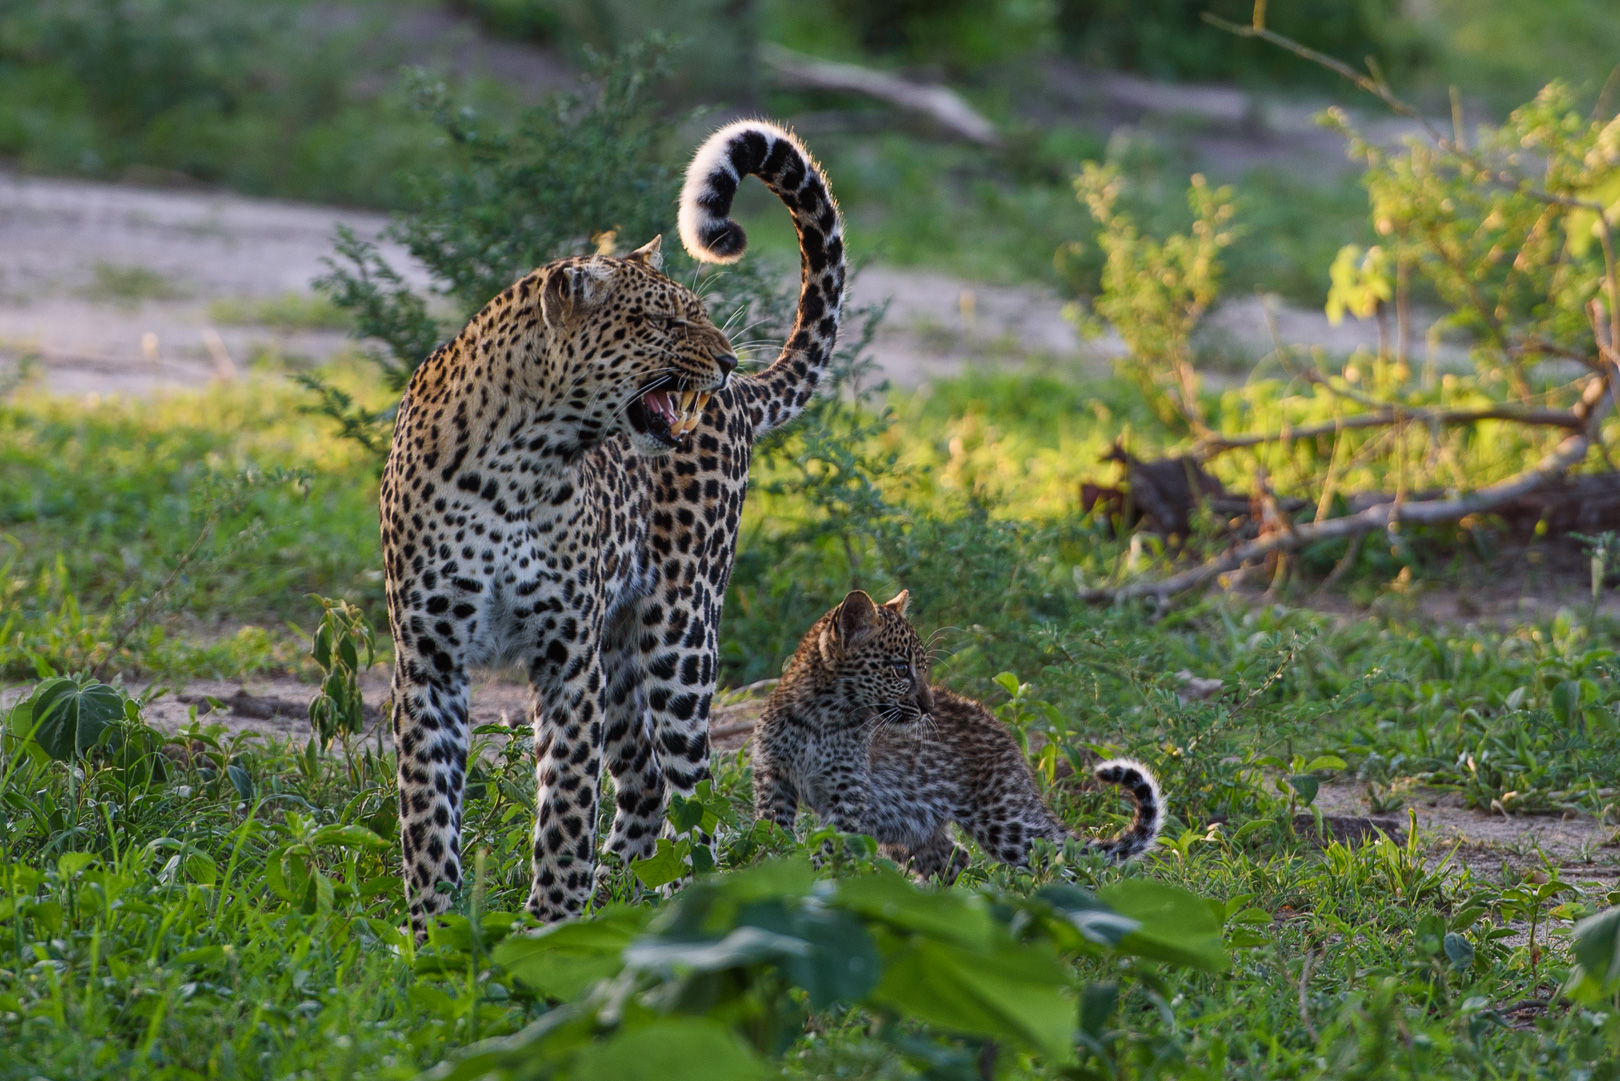 Female leopard with young cub